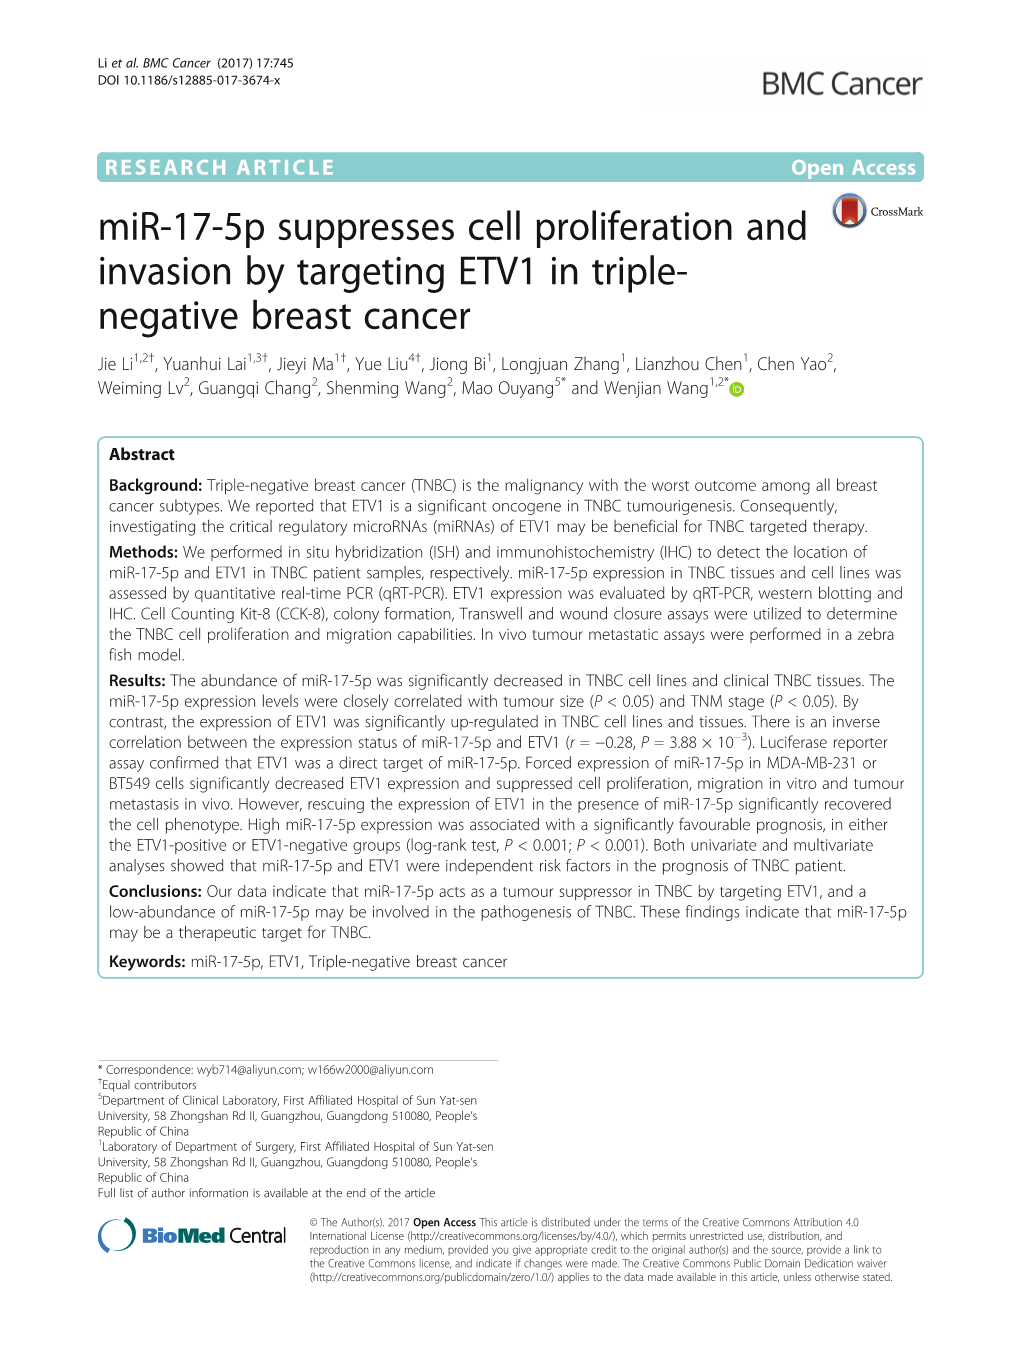 Mir-17-5P Suppresses Cell Proliferation and Invasion By